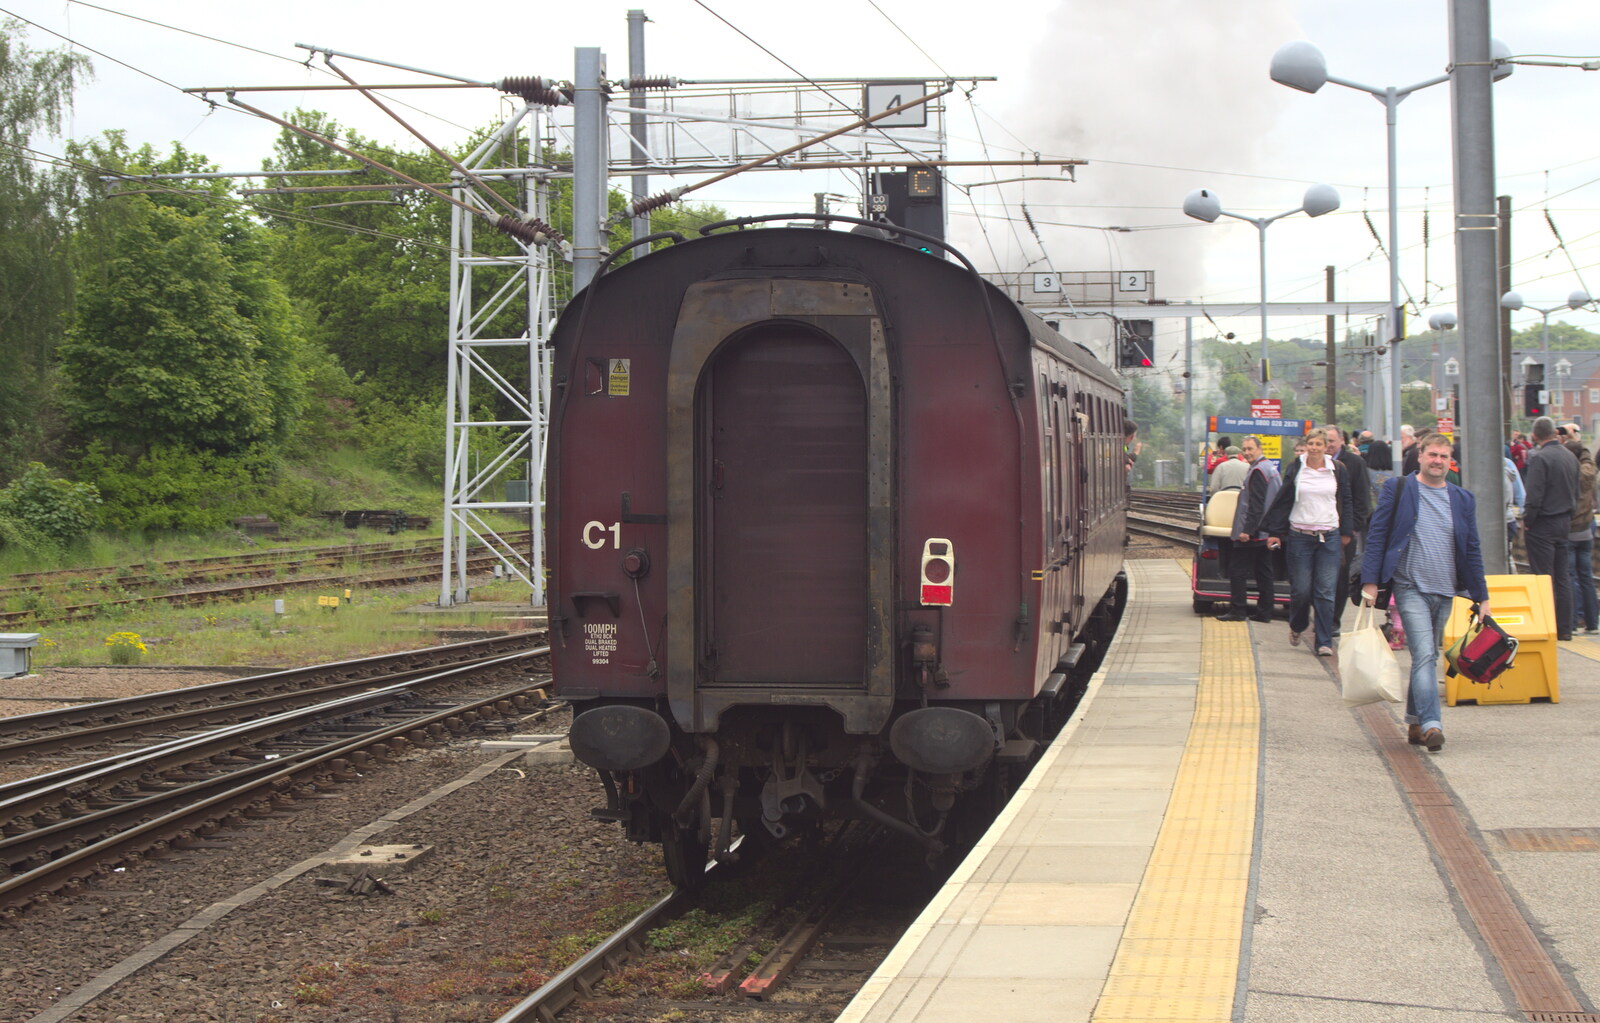 The rake of Mark 1 coaches heads off from Tangmere at Norwich Station, Norwich, Norfolk - 25th May 2013